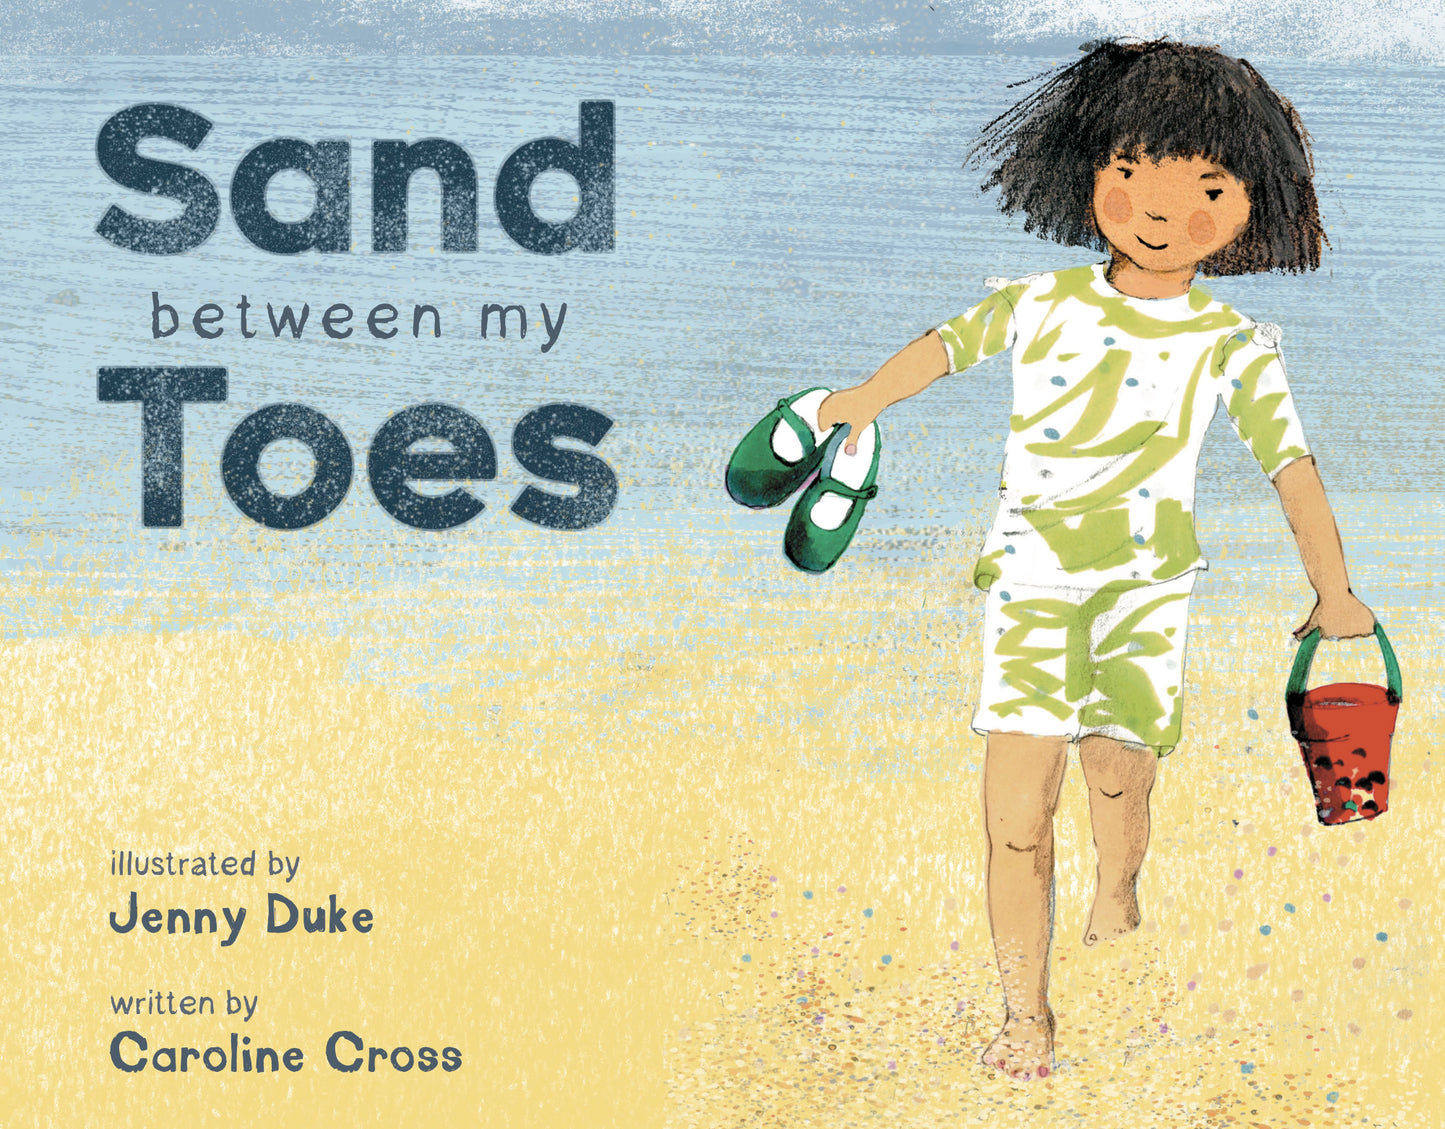 Sand Between My Toes (Hardcover Edition)